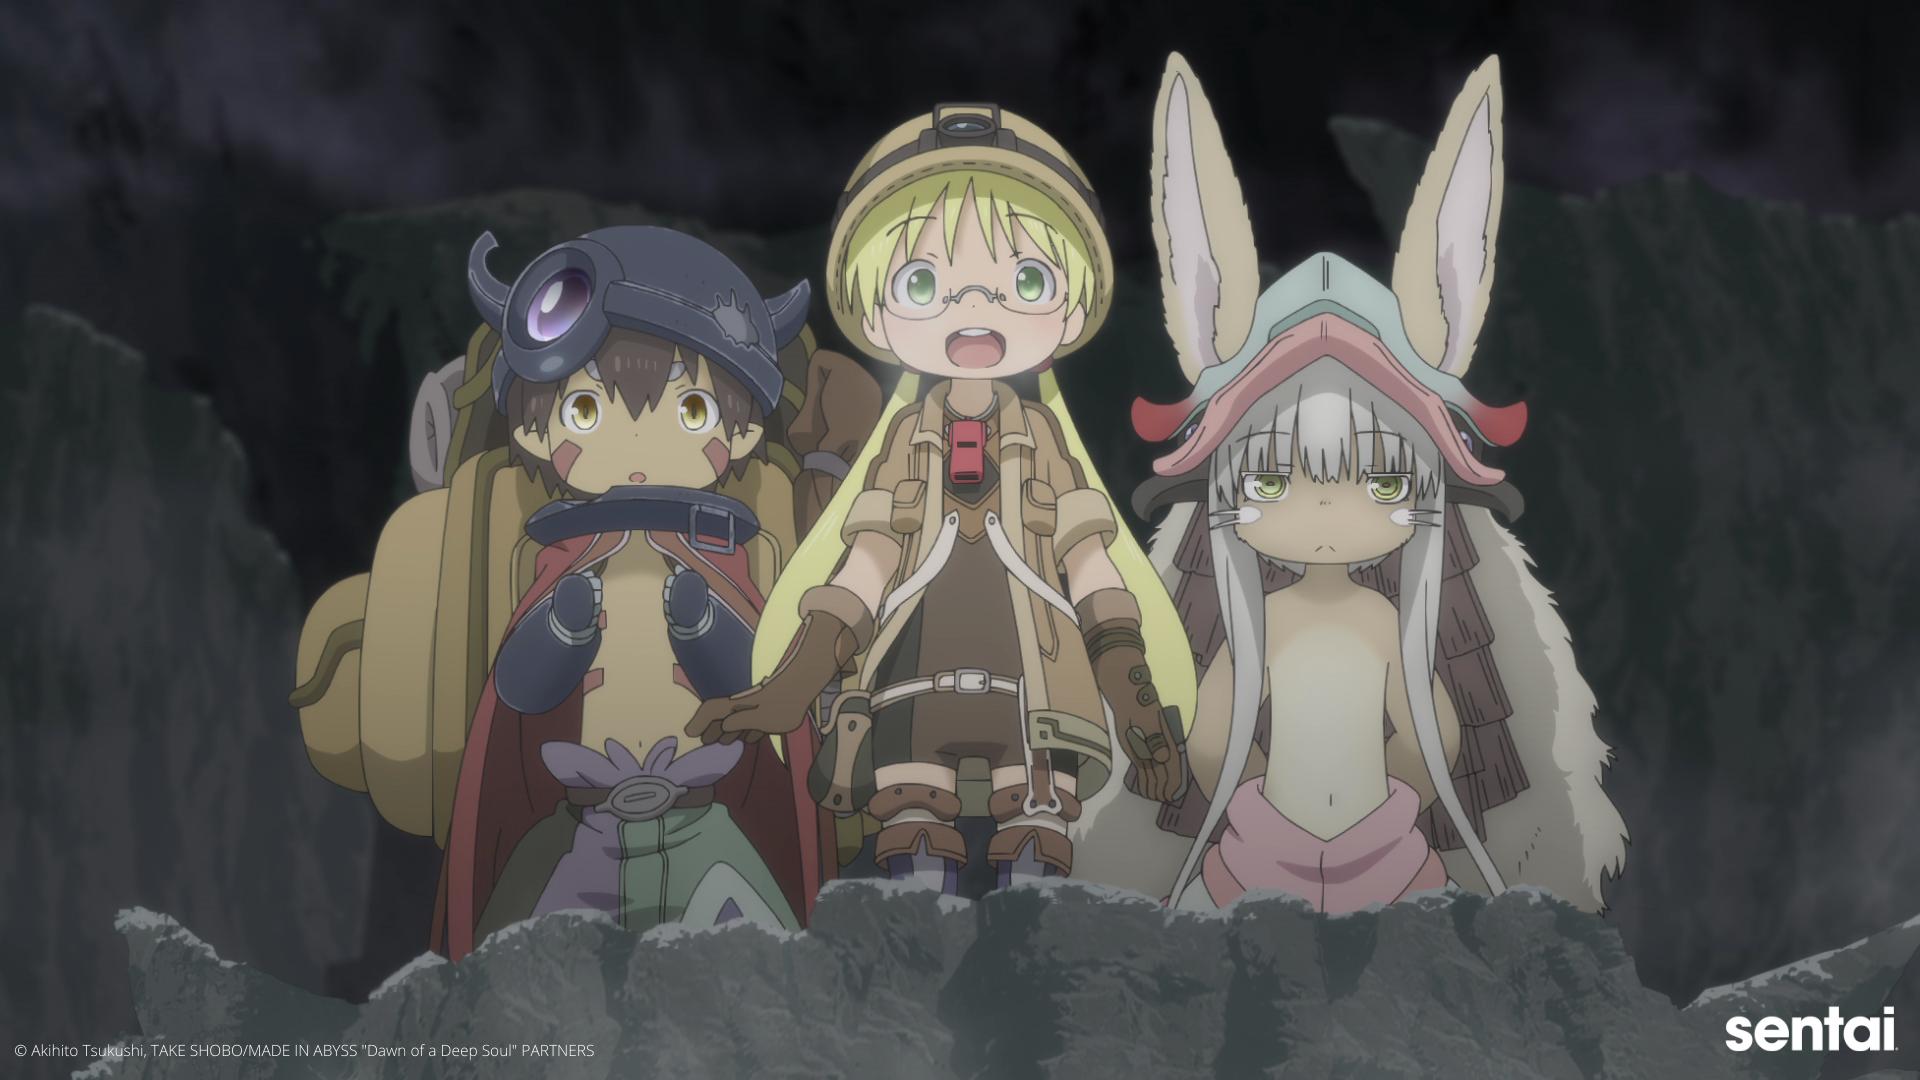 MADE IN ABYSS: Dawn of the Deep Soul - Dubbed, Sentai Presents MADE IN  ABYSS: Dawn of the Deep Soul - Dubbed